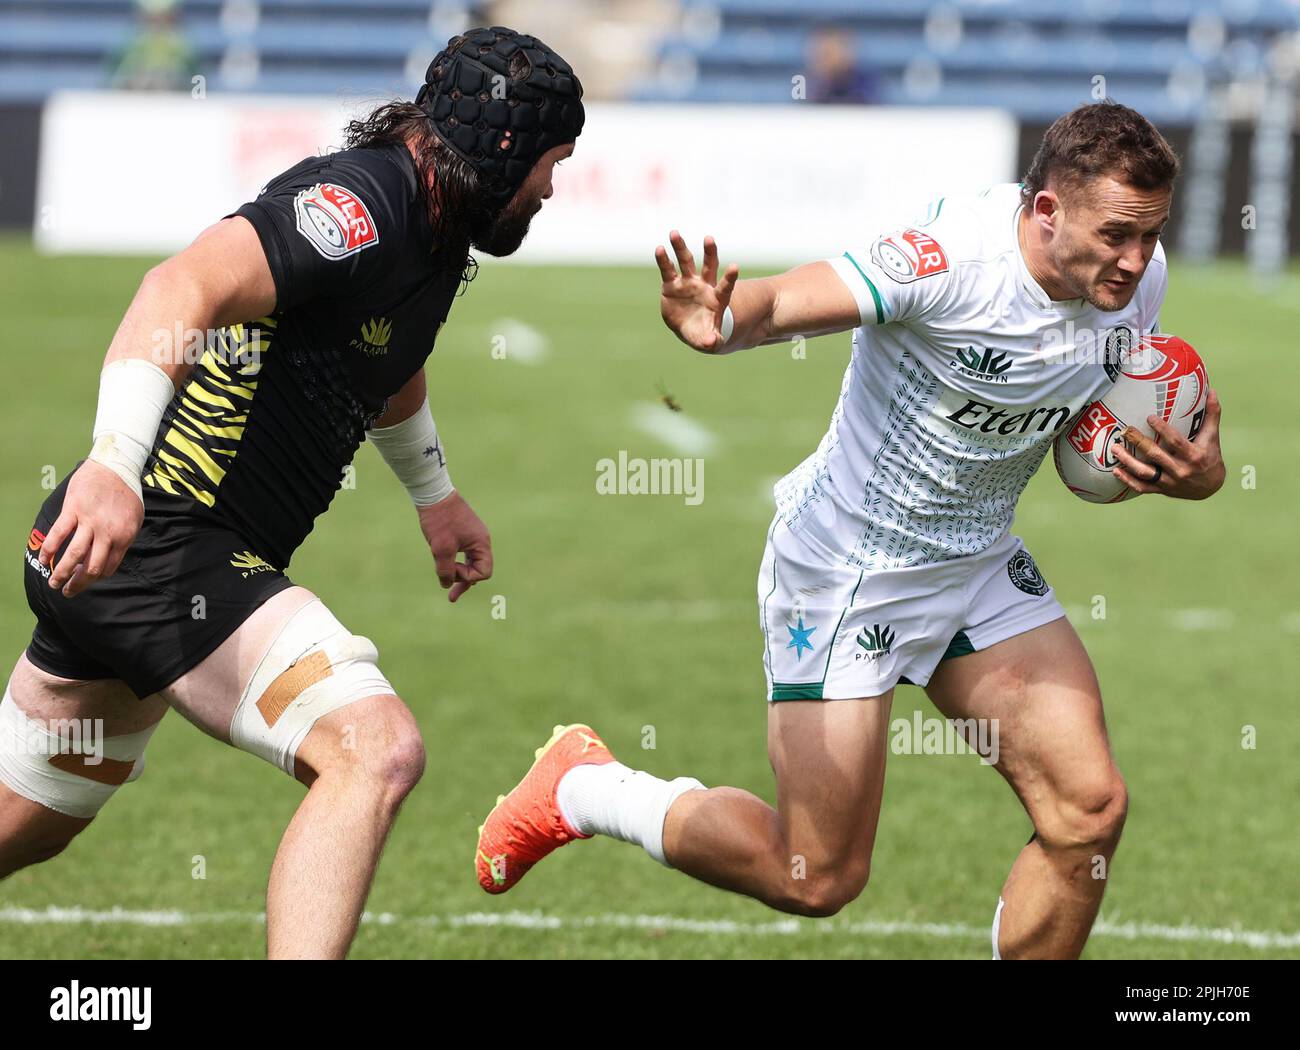 Chicago, USA, 2 April 2022. Major League Rugby (MLR) action between the Chicago Hounda and Houston SaberCats at SeatGeek Stadium in Bridgeview, IL, USA. Credit: Tony Gadomski / All Sport Imaging / Alamy Live News Stock Photo